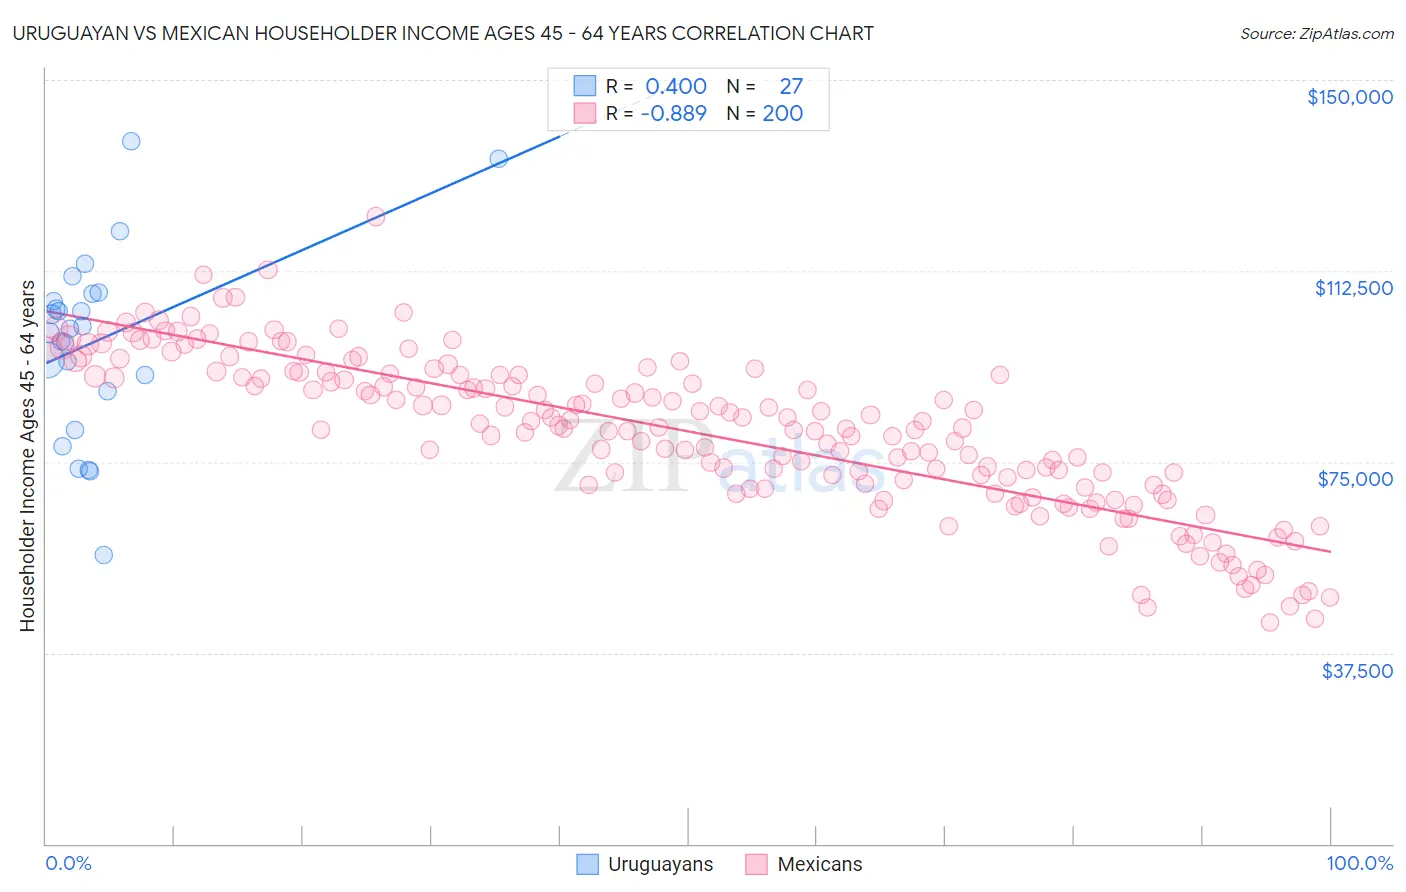 Uruguayan vs Mexican Householder Income Ages 45 - 64 years